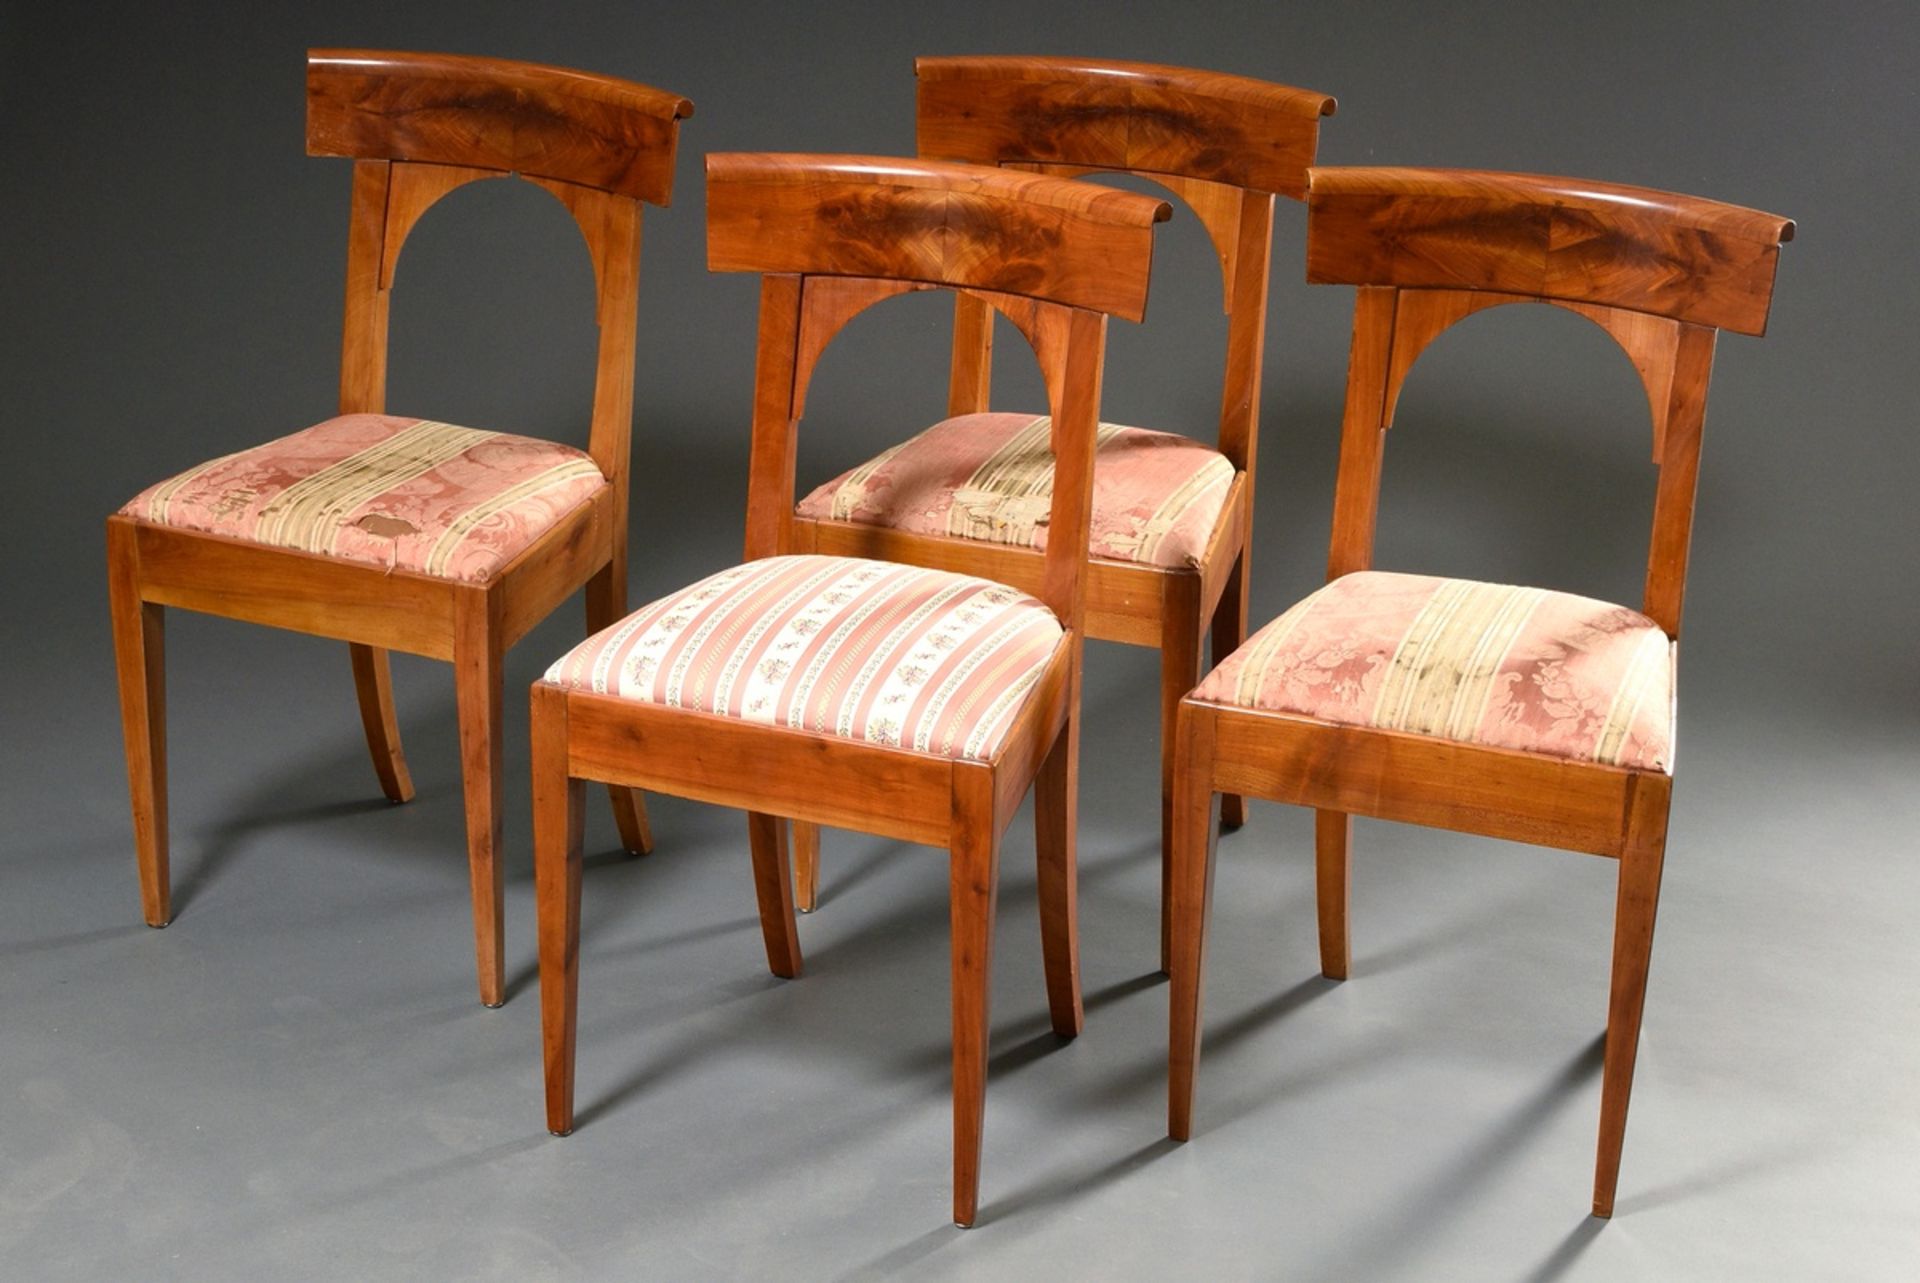 4 plain Biedermeier chairs with shovel backrest and arched element in the back, cherry veneer, 1st  - Image 2 of 8